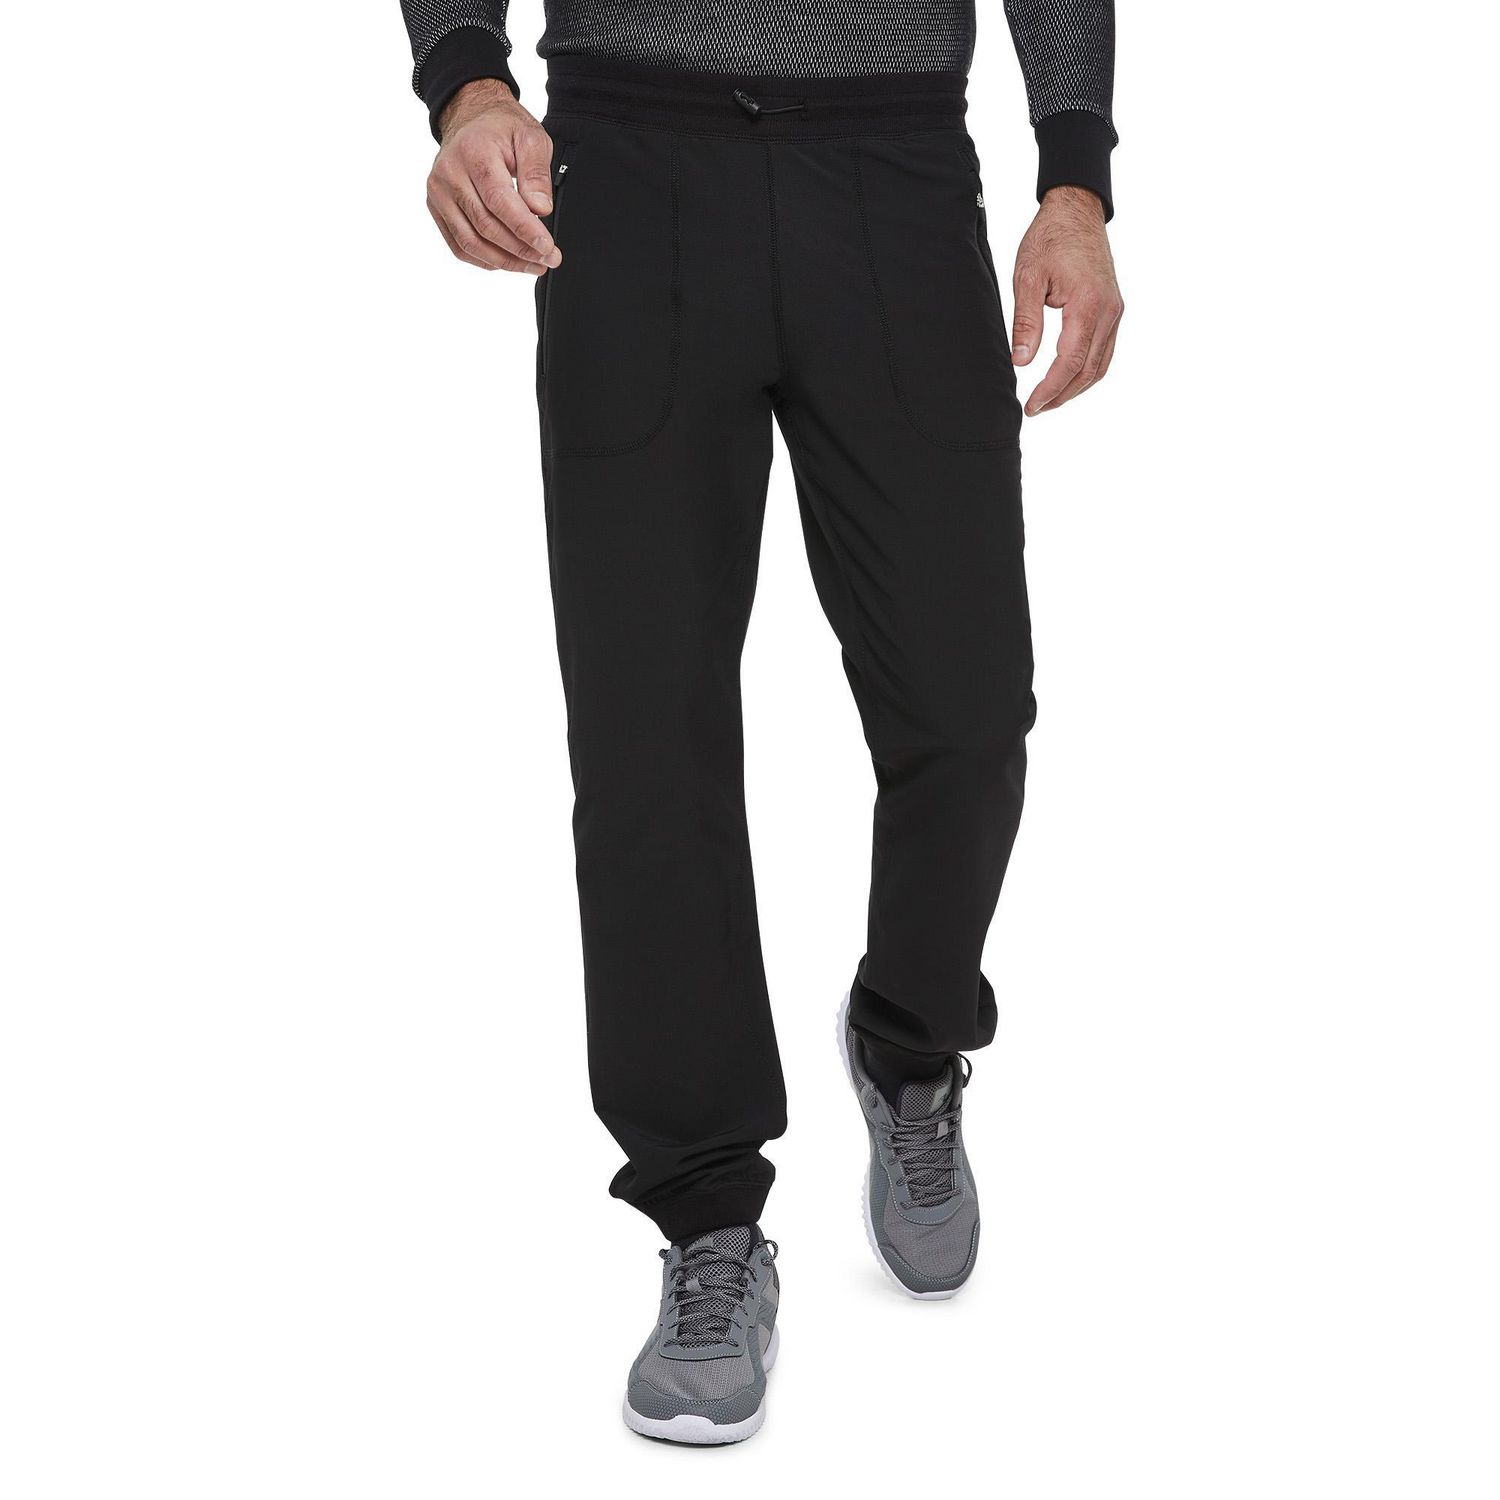 Athletic Works Men's Ribbed Trim Woven Pant | Walmart Canada